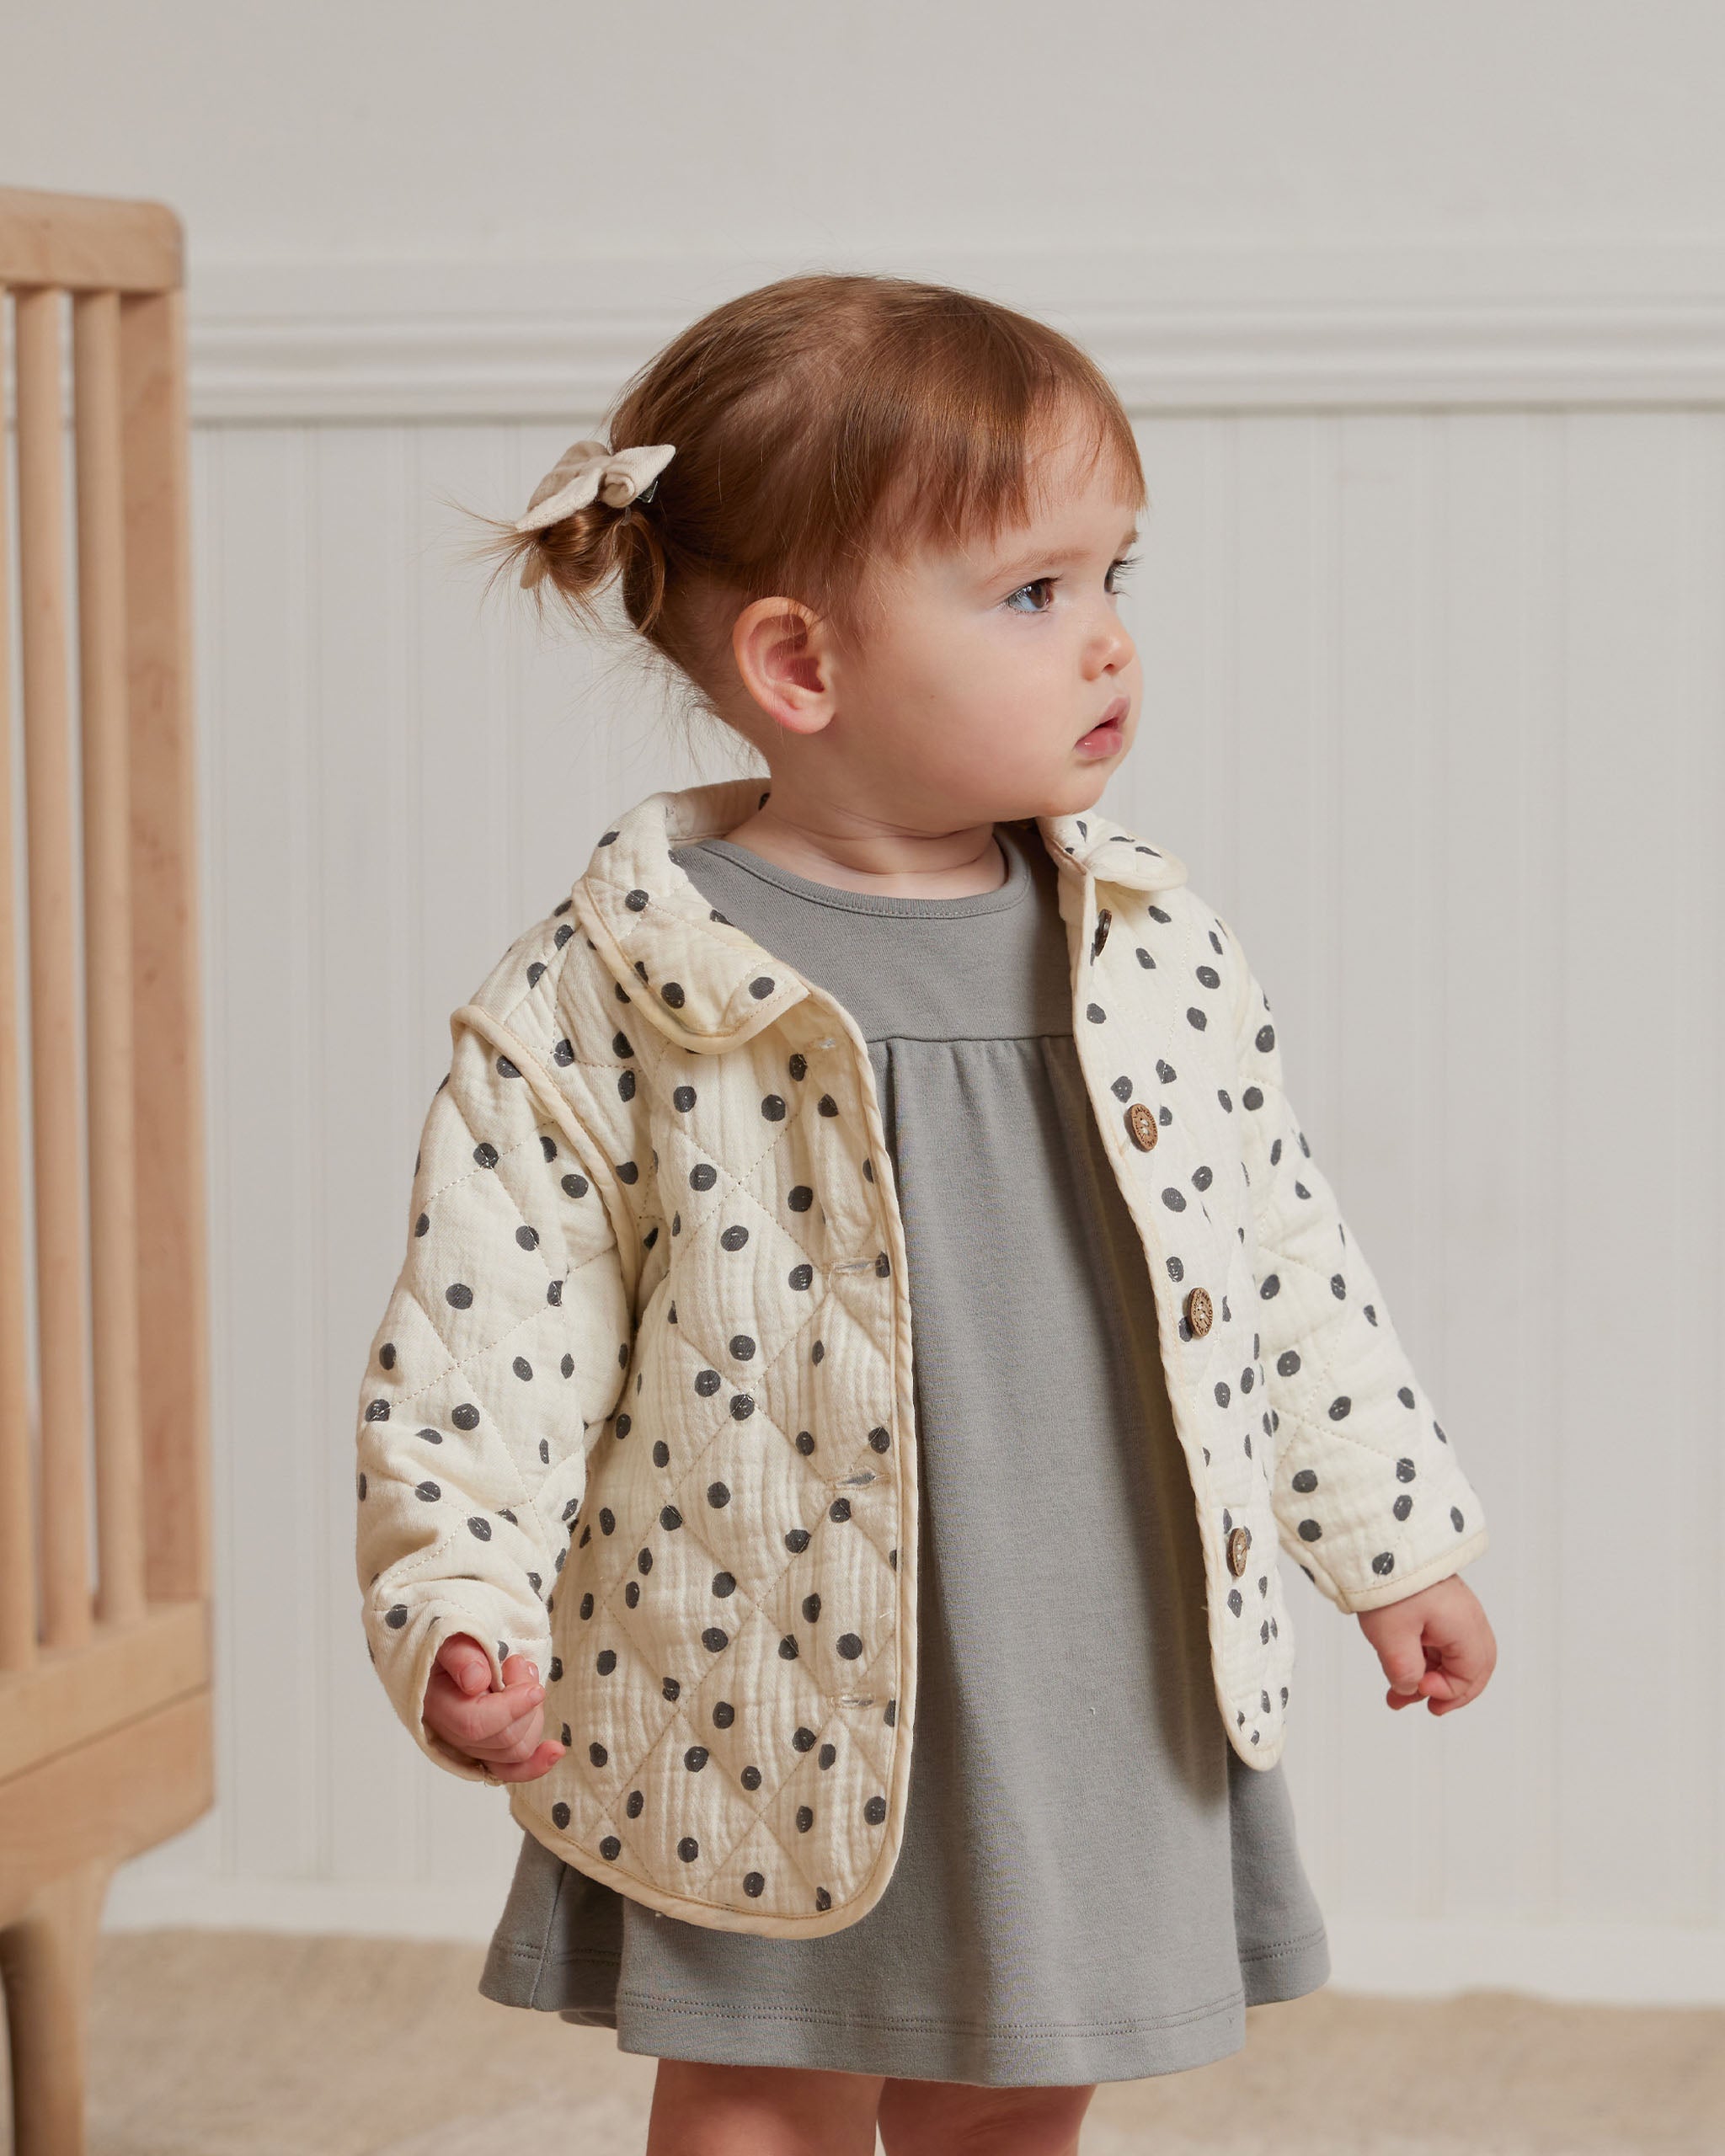 Quilted Jacket || Navy Dot - Rylee + Cru | Kids Clothes | Trendy Baby Clothes | Modern Infant Outfits |